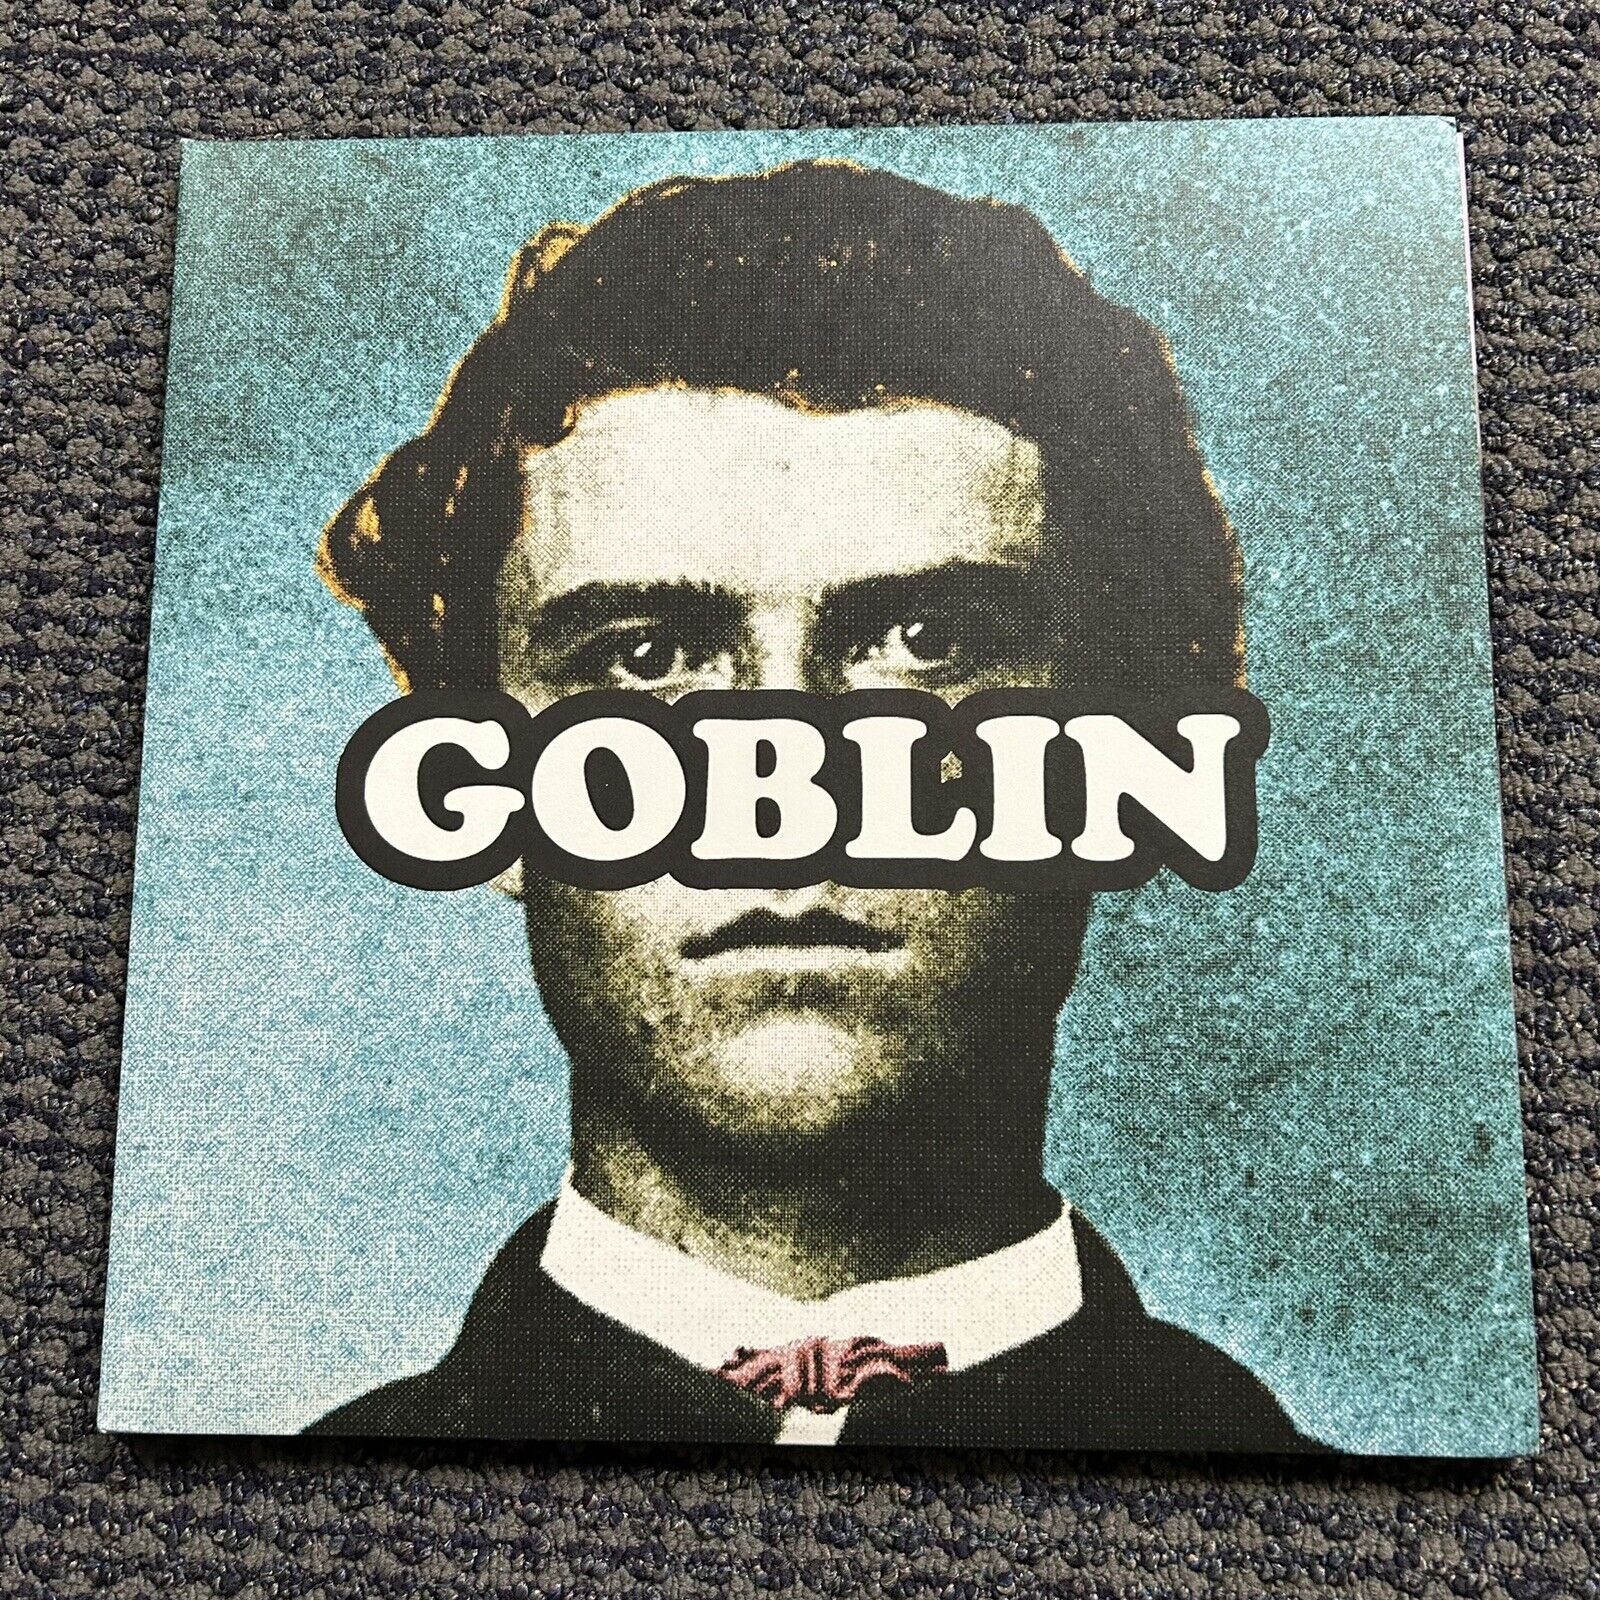 Goblin by Tyler the Creator (Record, 2011)